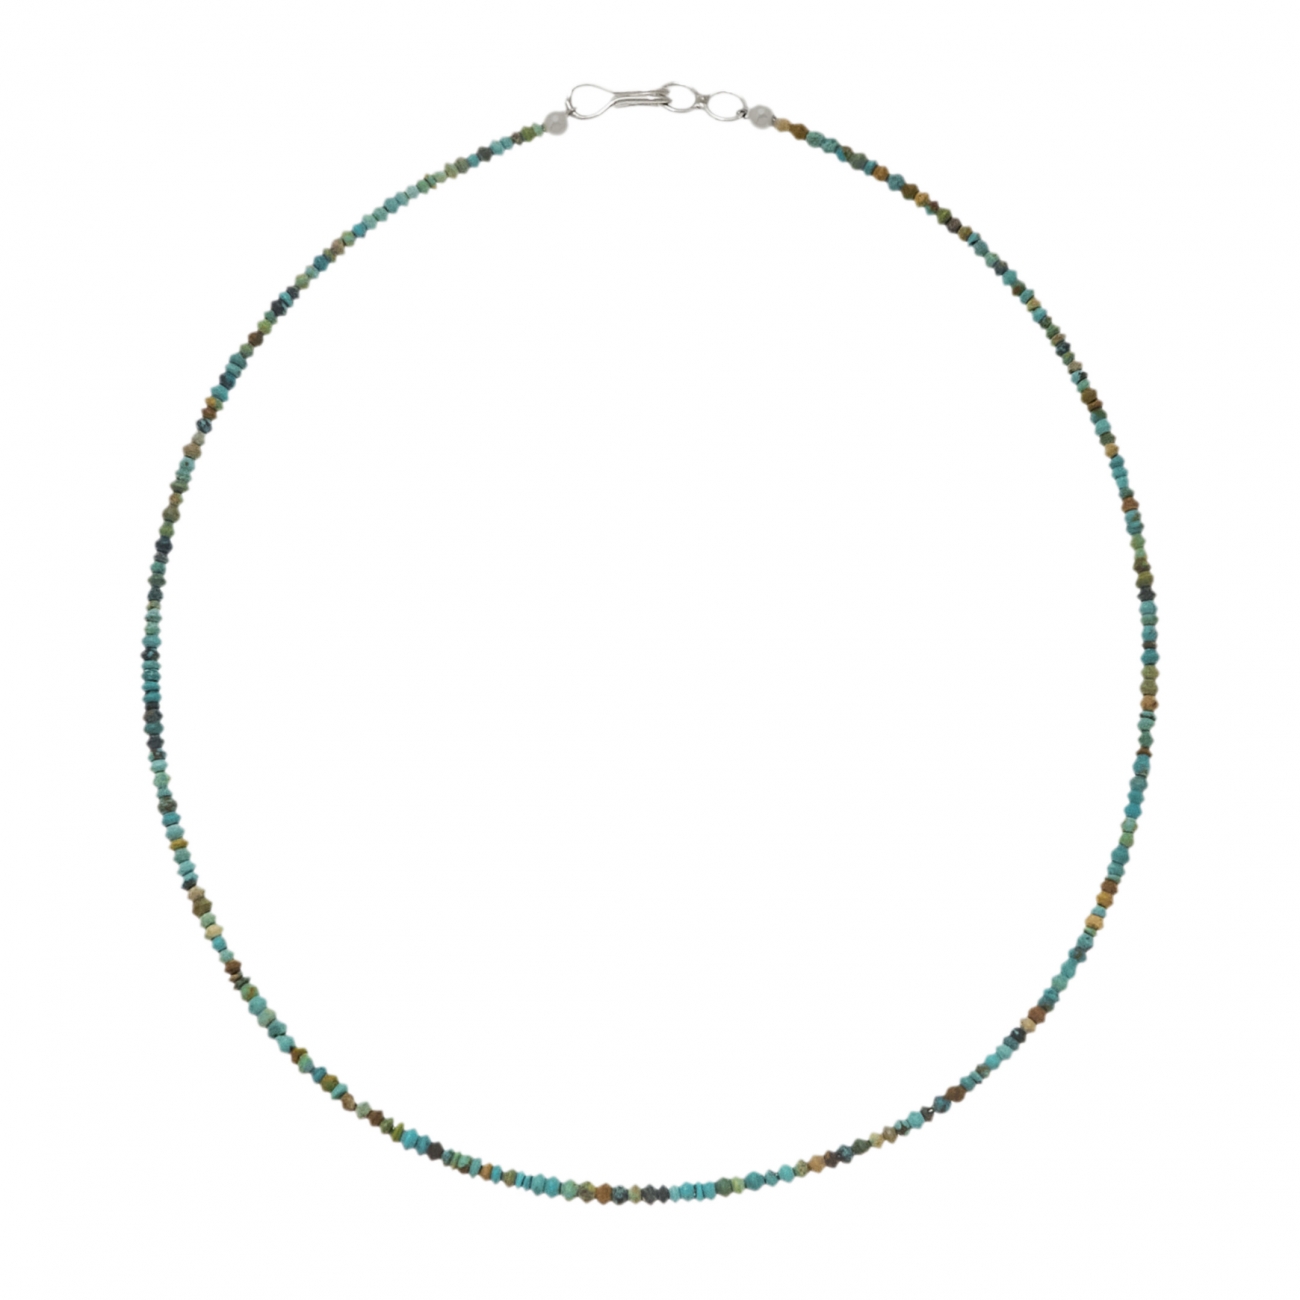 Thin choker necklace in turquoise CO211 - Harpo Paris